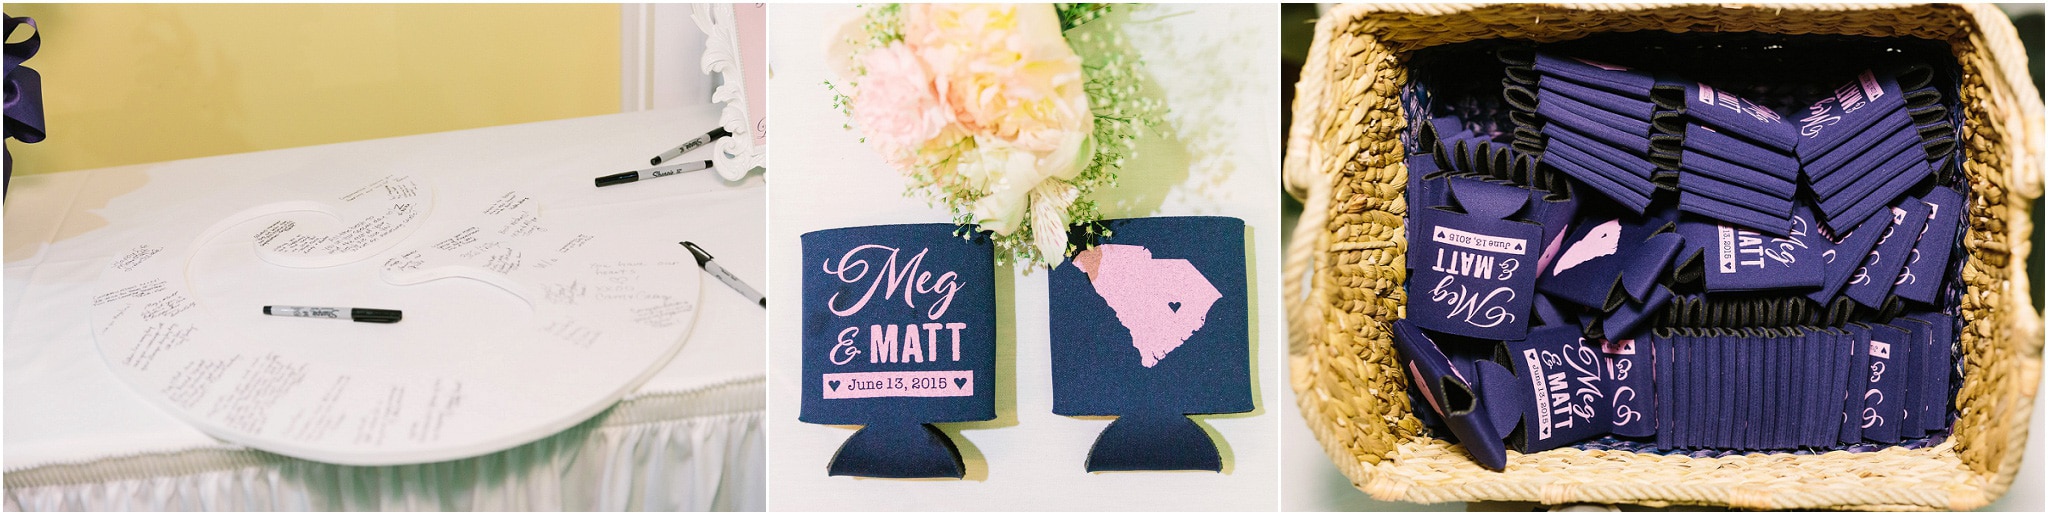 Beer holders with the wedding details for their guests